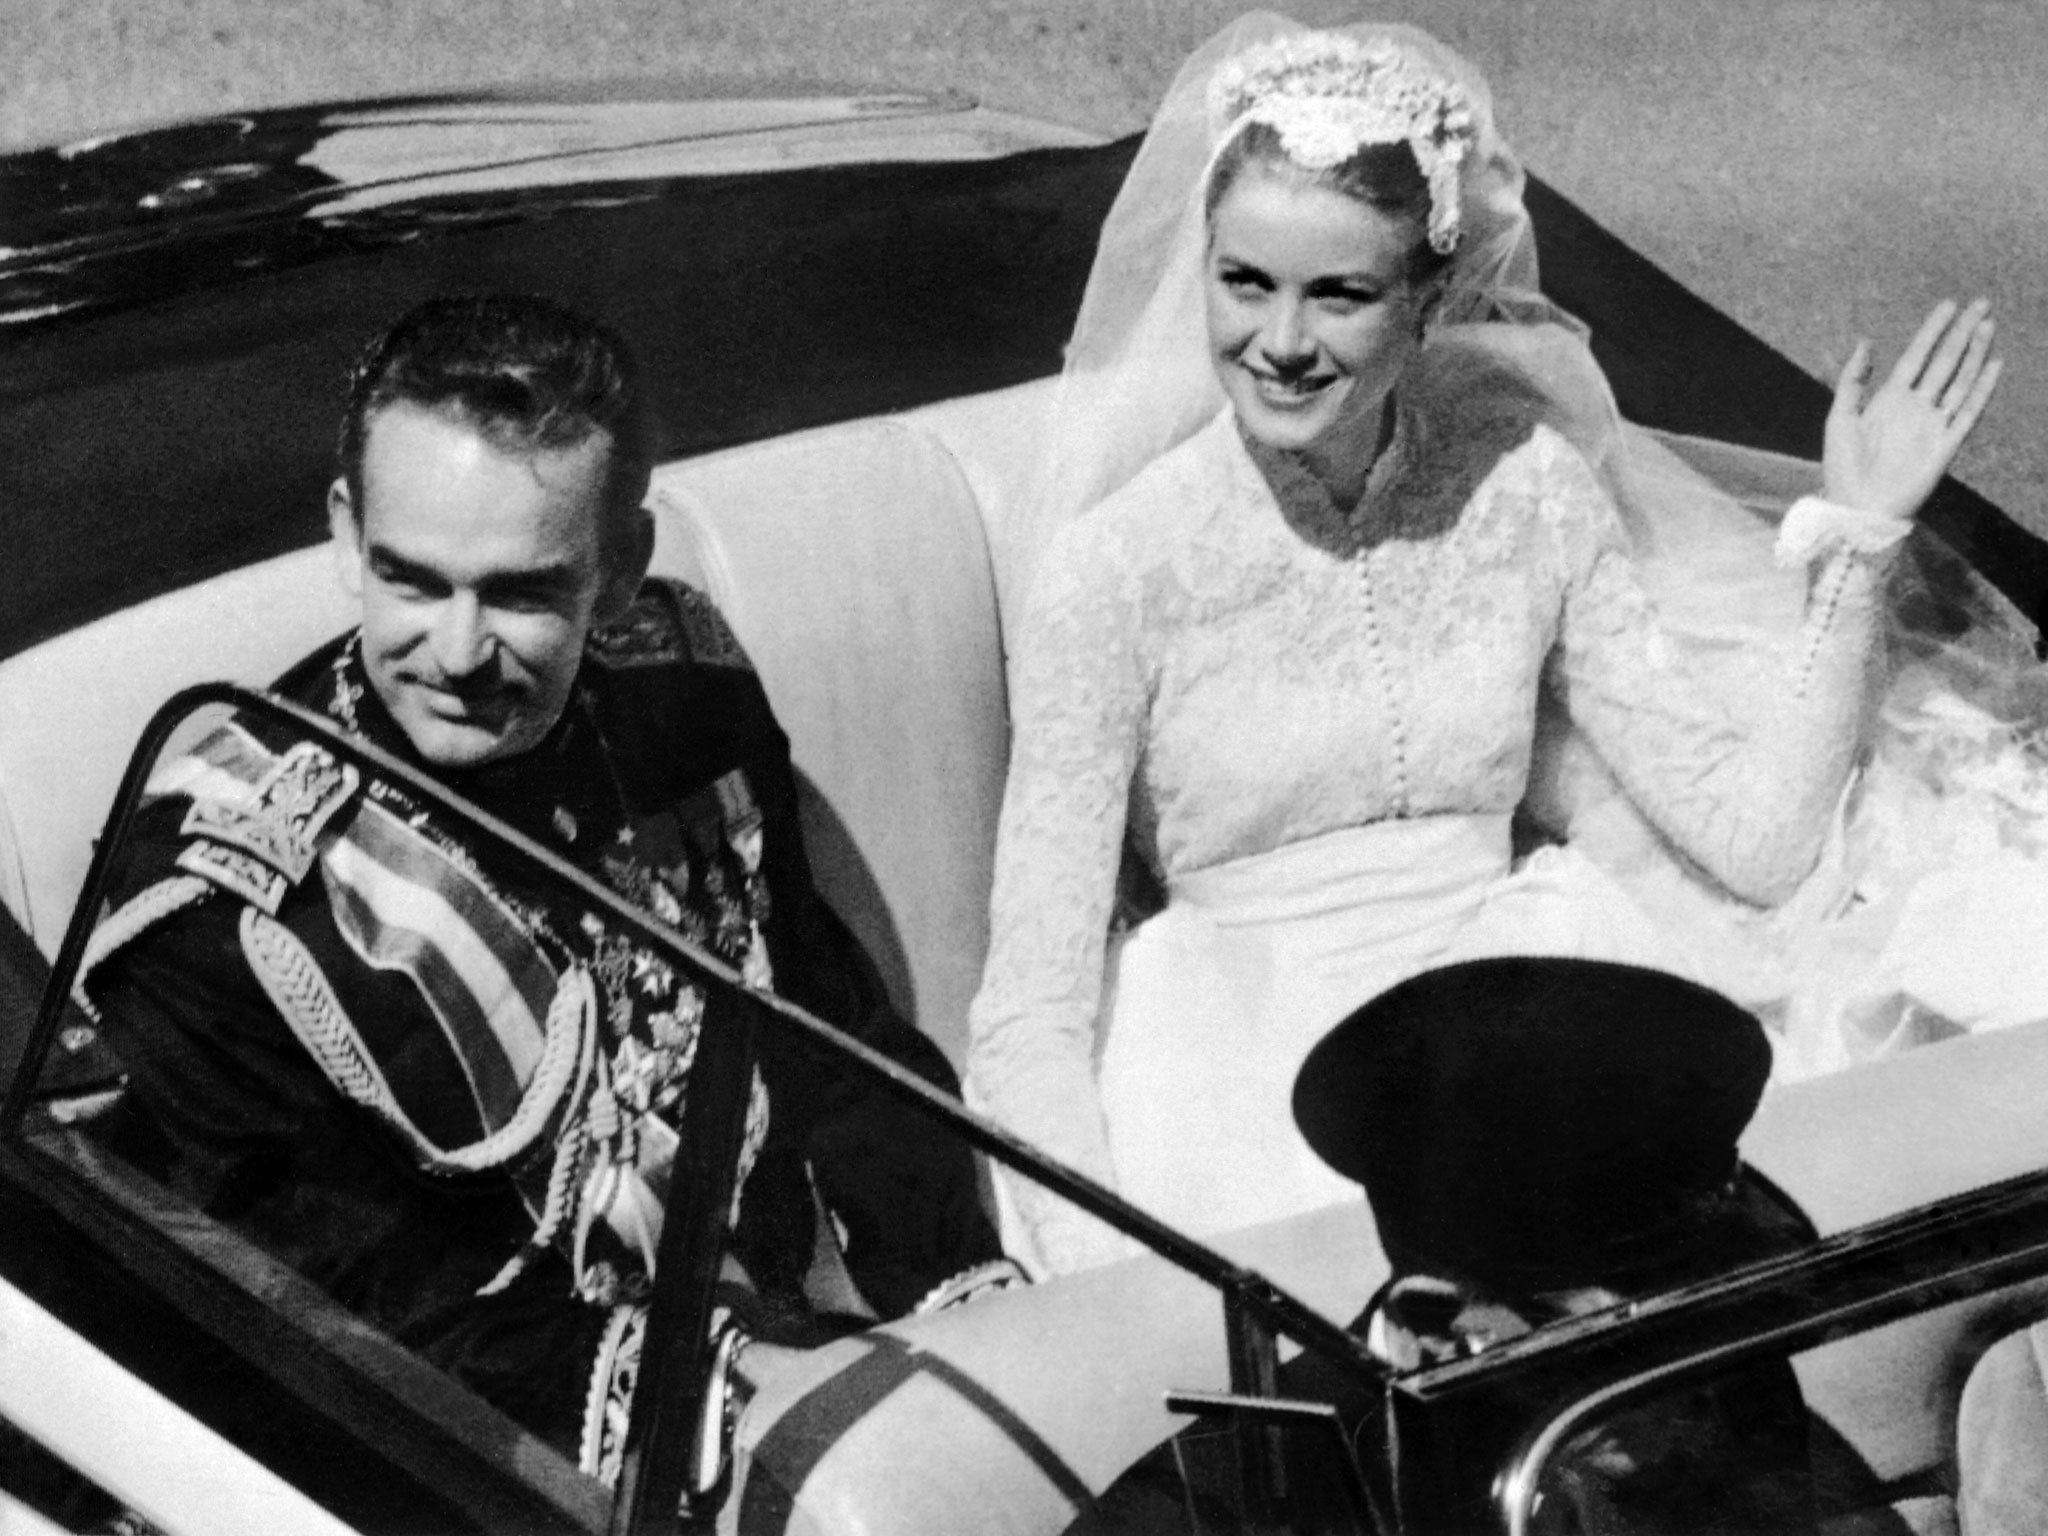 Prince Rainier III of Monaco and US actress and princess of Monaco Grace Kelly on their wedding day in 1956